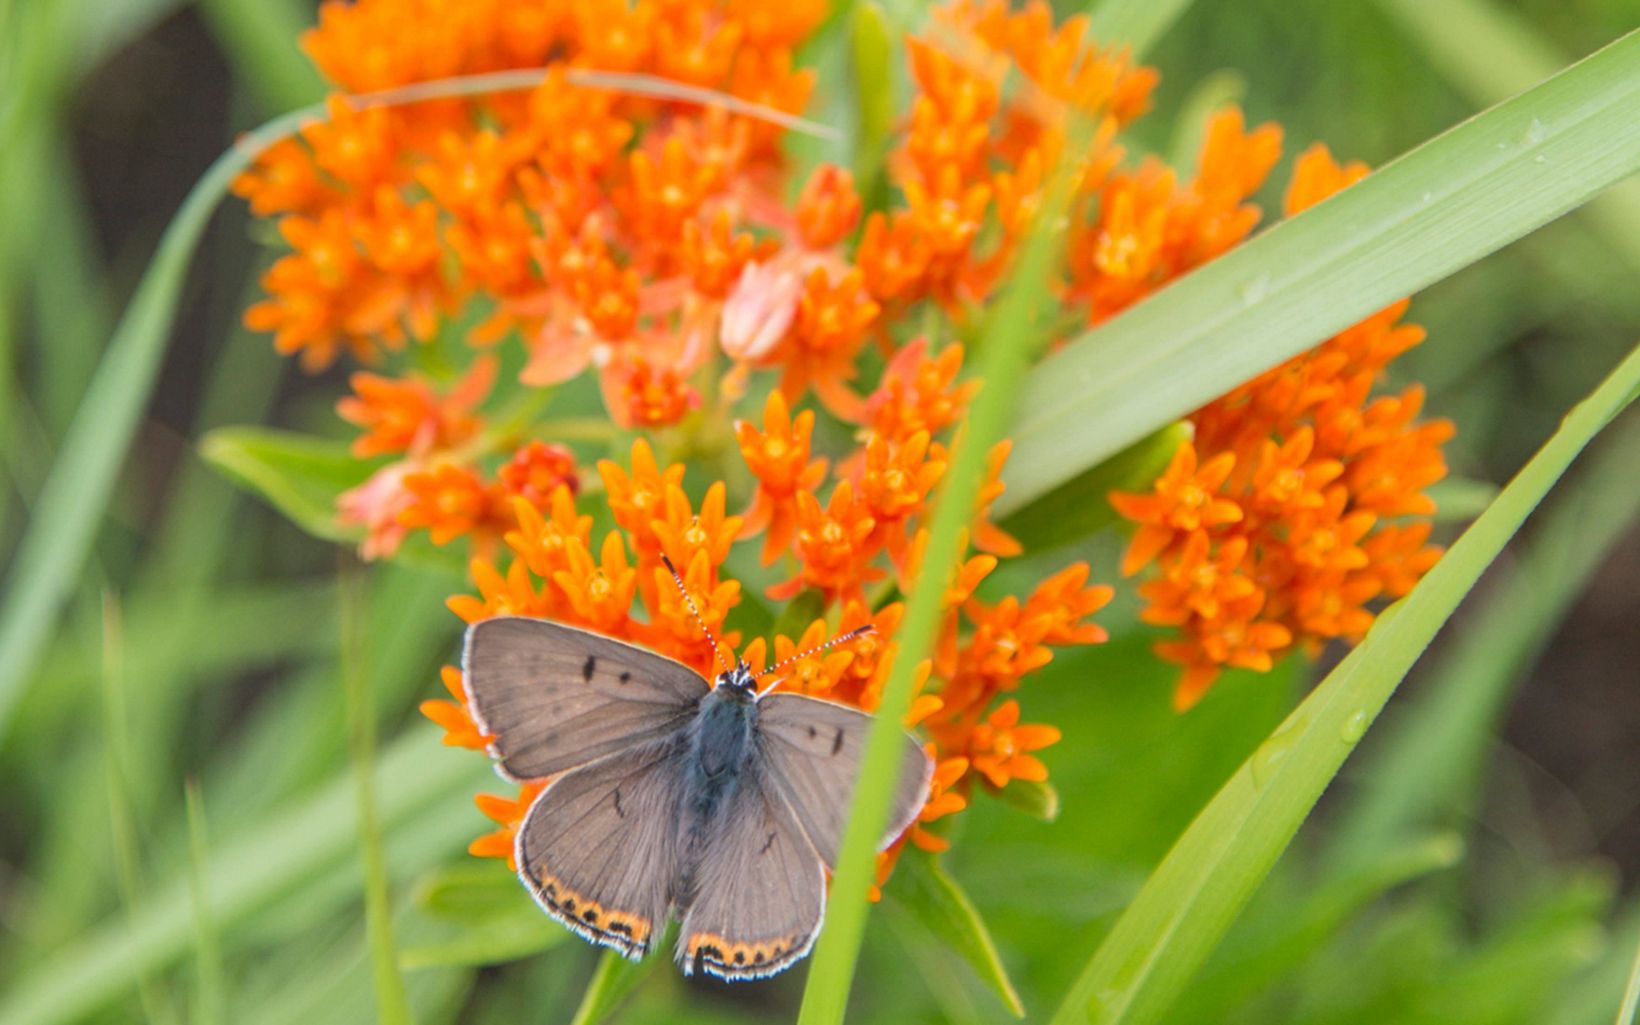 Pollinators More than 190 different butterfly species have been recorded in Kansas. © Ryan Donnell